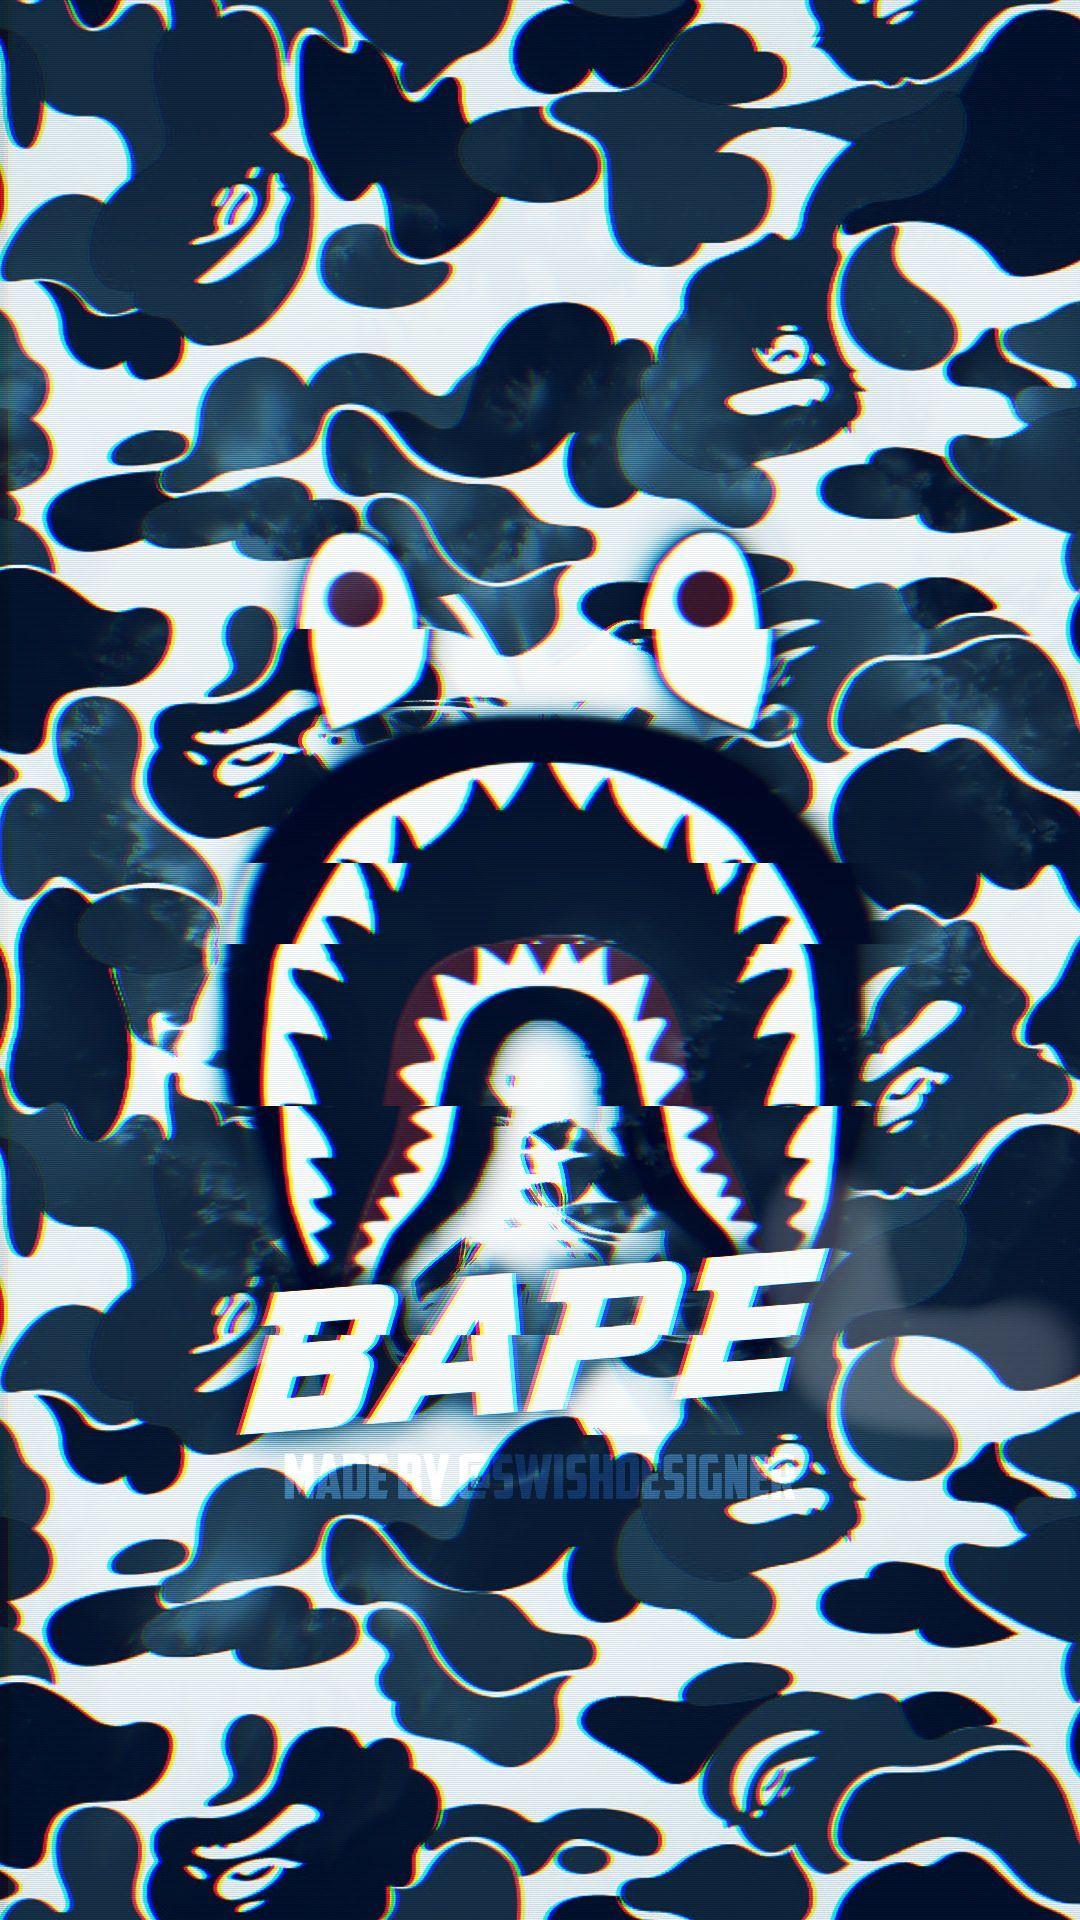 Supreme wallpaper by ZetroVerse  Download on ZEDGE  1010  Supreme  wallpaper Bape shark wallpaper Bape wallpapers